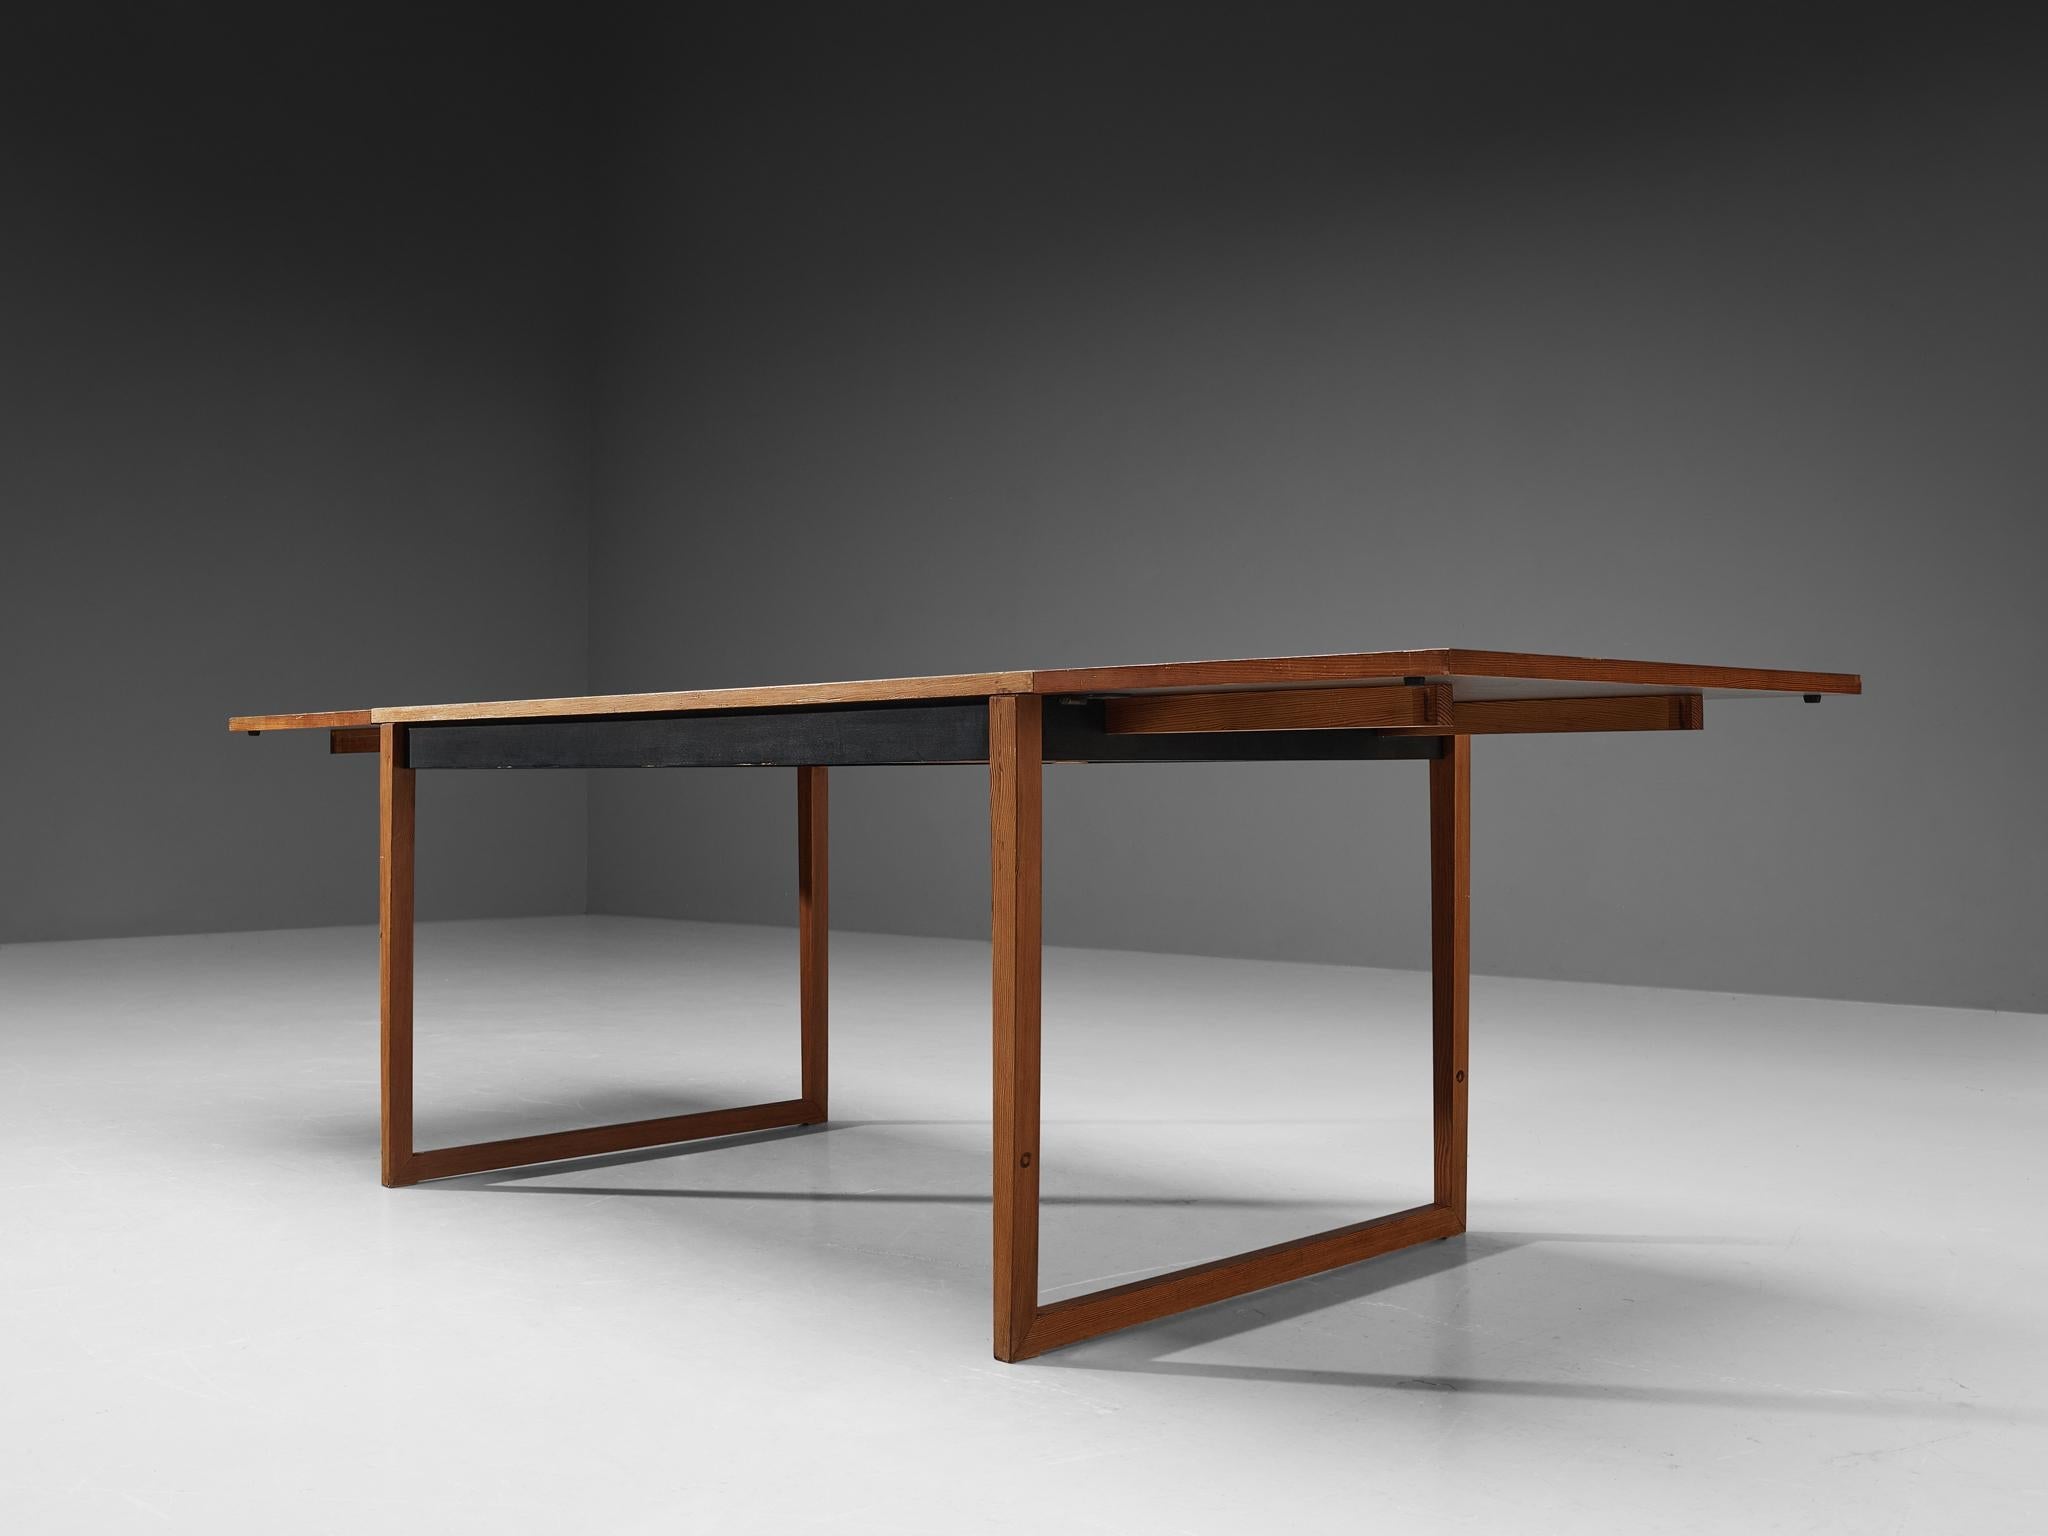 Extremely Rare Knud Vodder for Niels Vodder Dining Table in Oregon Pine